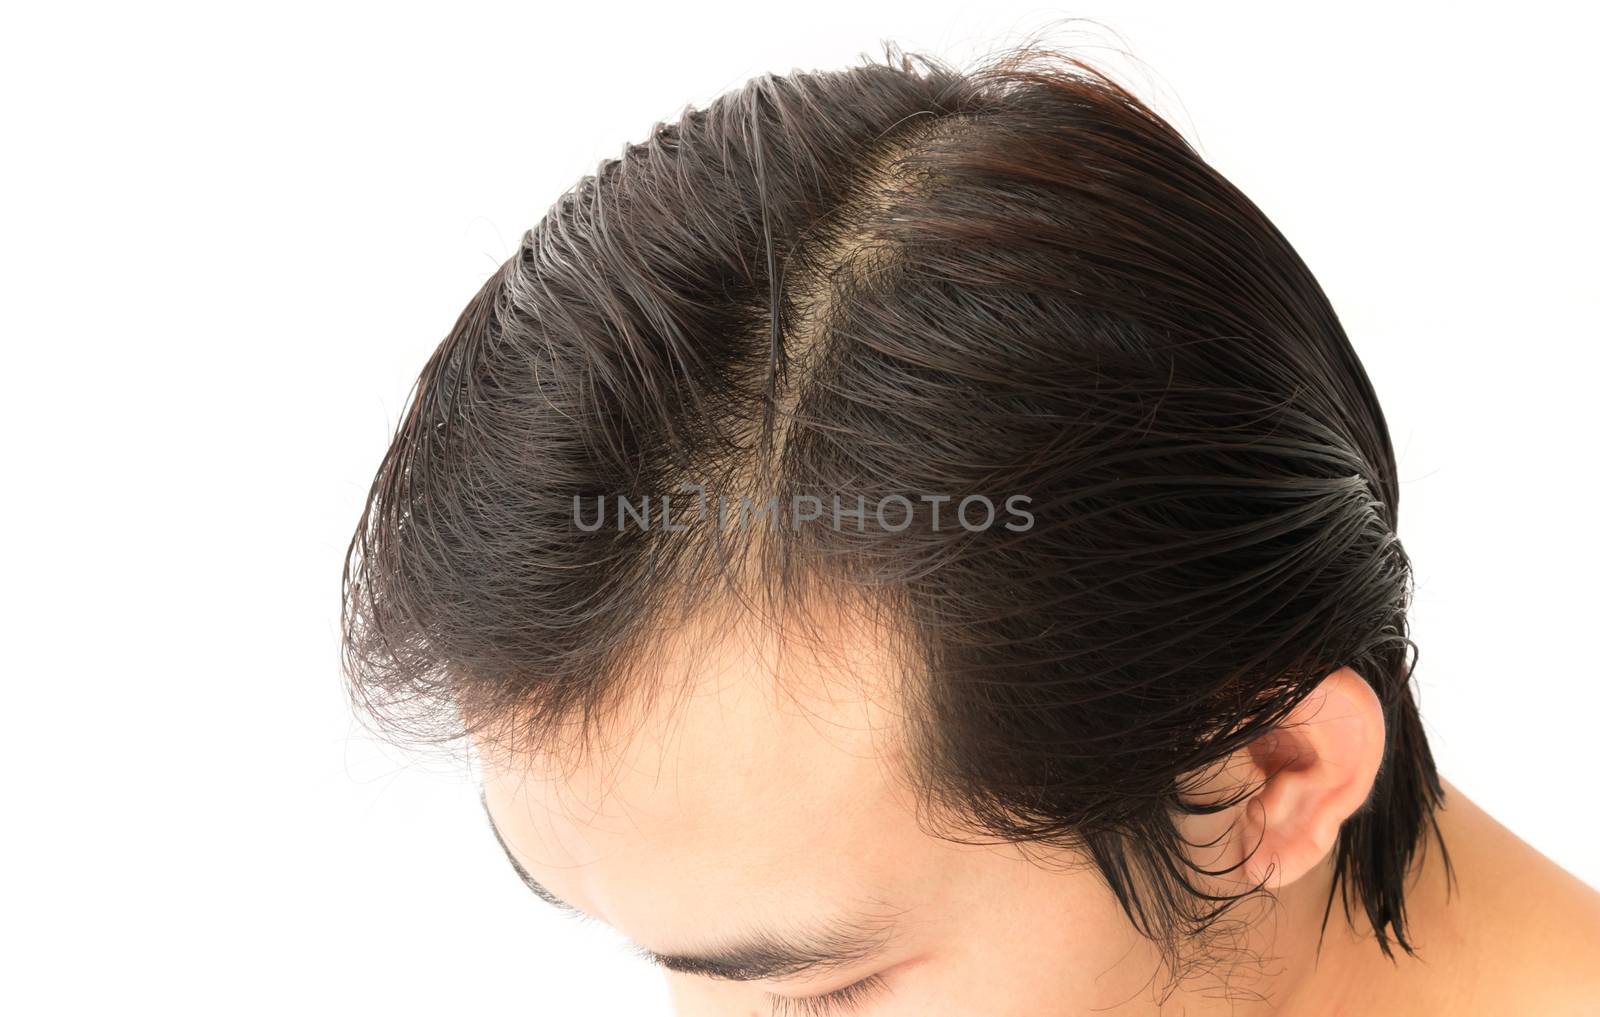 Young man serious hair loss problem for health care shampoo and beauty product concep